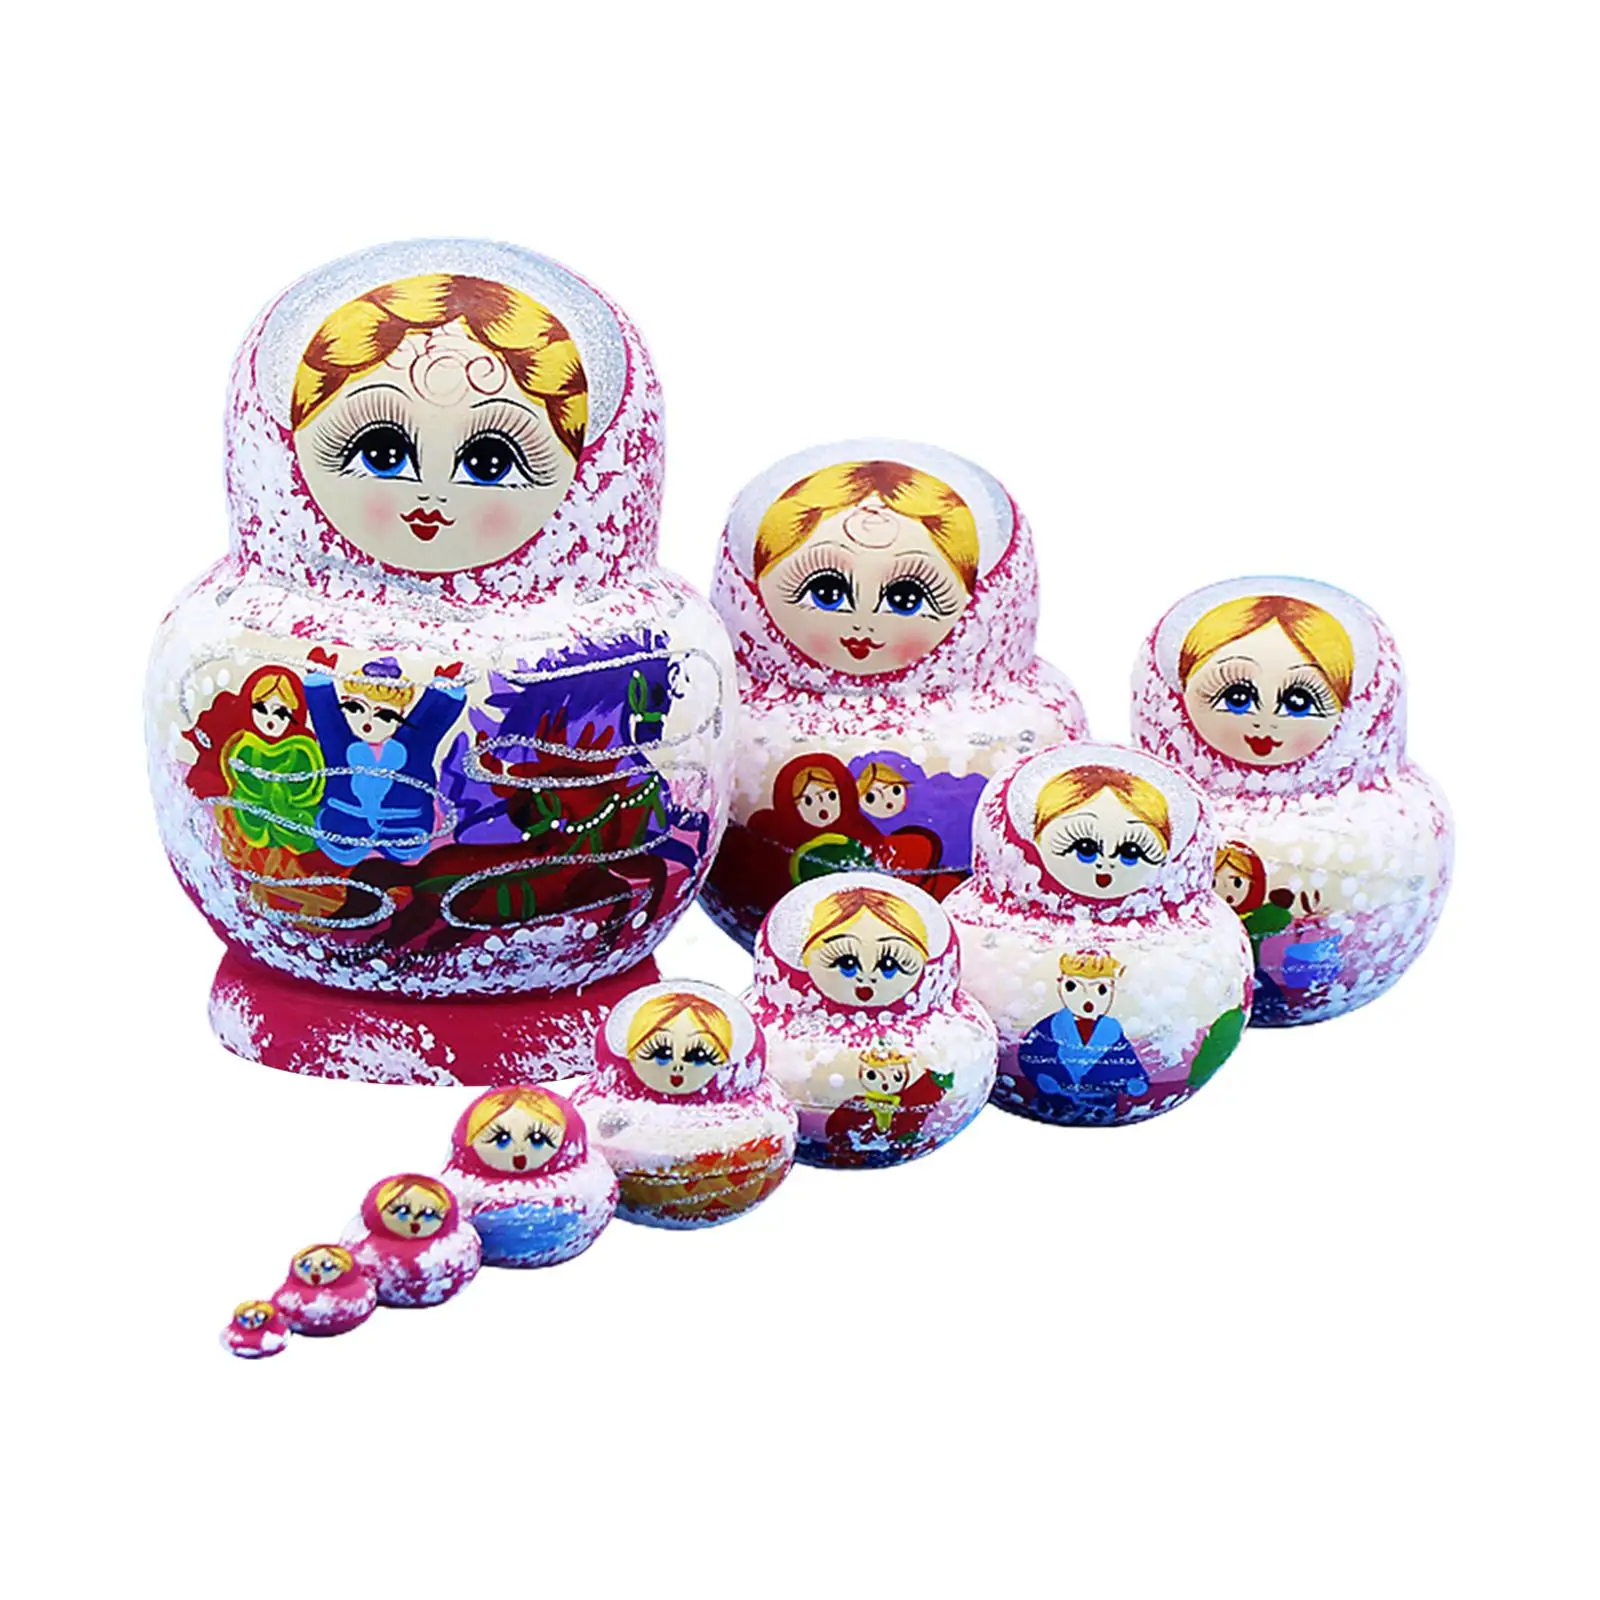 10x Nesting Doll Stackable Collectible Crafts Ornament for Home Adults Kids